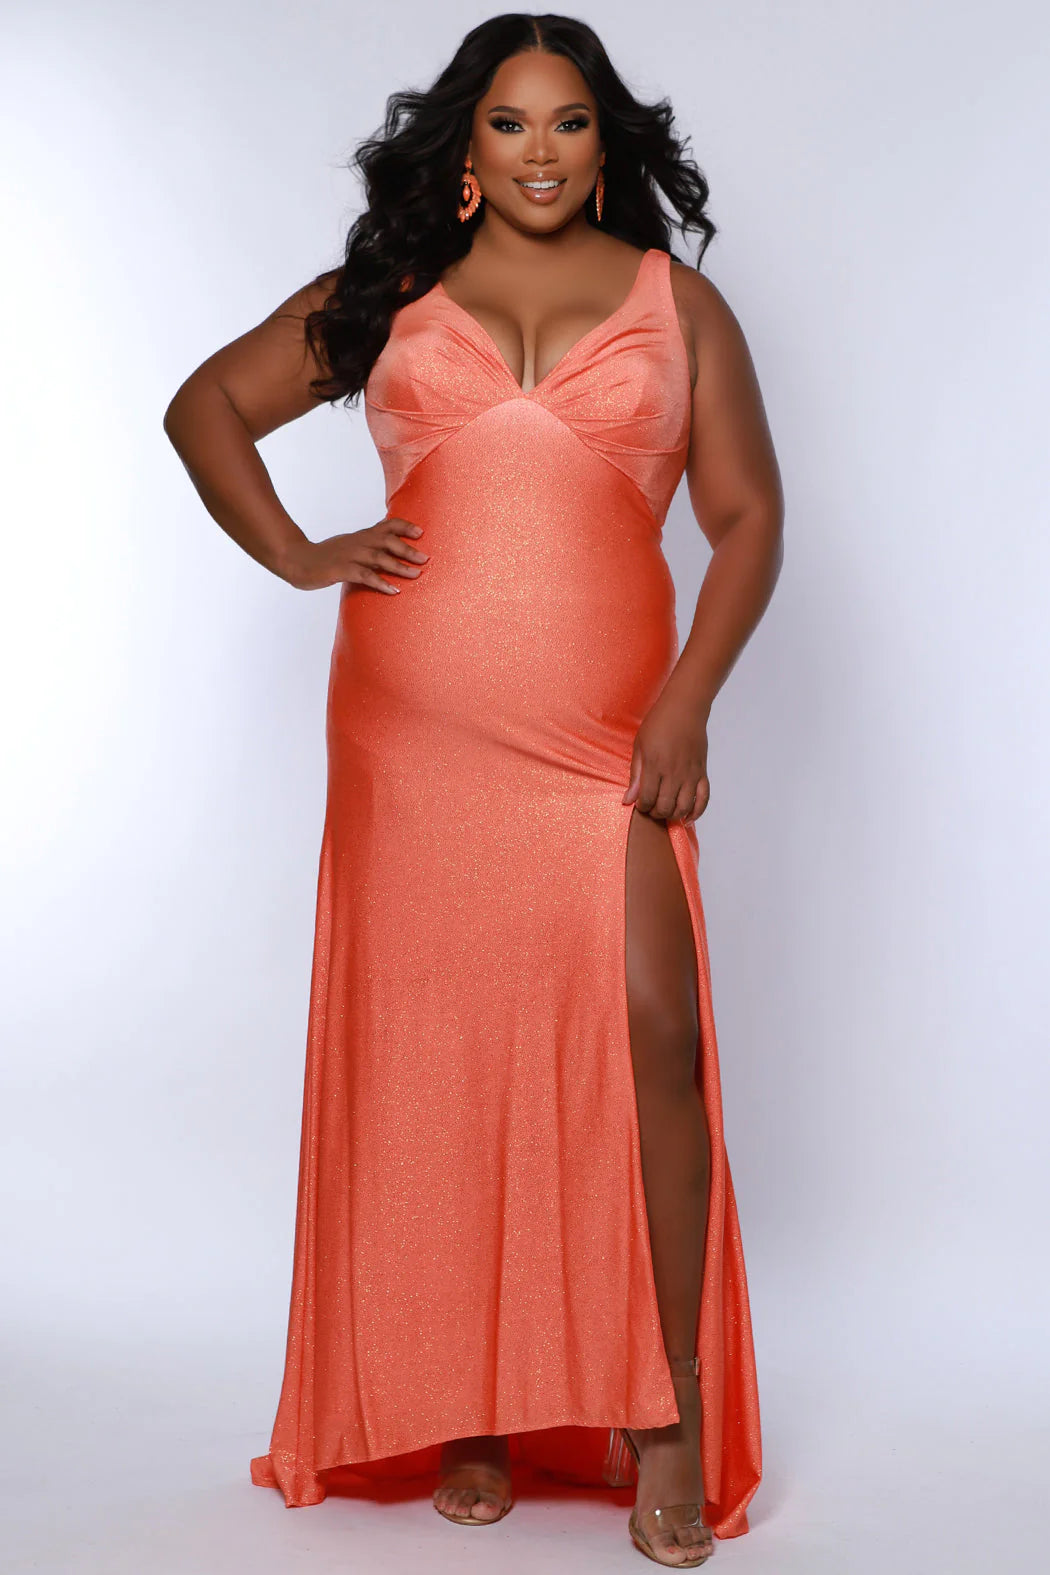 This Sydneys Closet SC7369 Plus Size Prom Dress will make you look amazing at your formal event. It features a stunning V neckline, with an elegant ruched back and a slit train. The fabric is comfortable and the slim fit is designed to flatter curves. Make a lasting impression at your special event! 